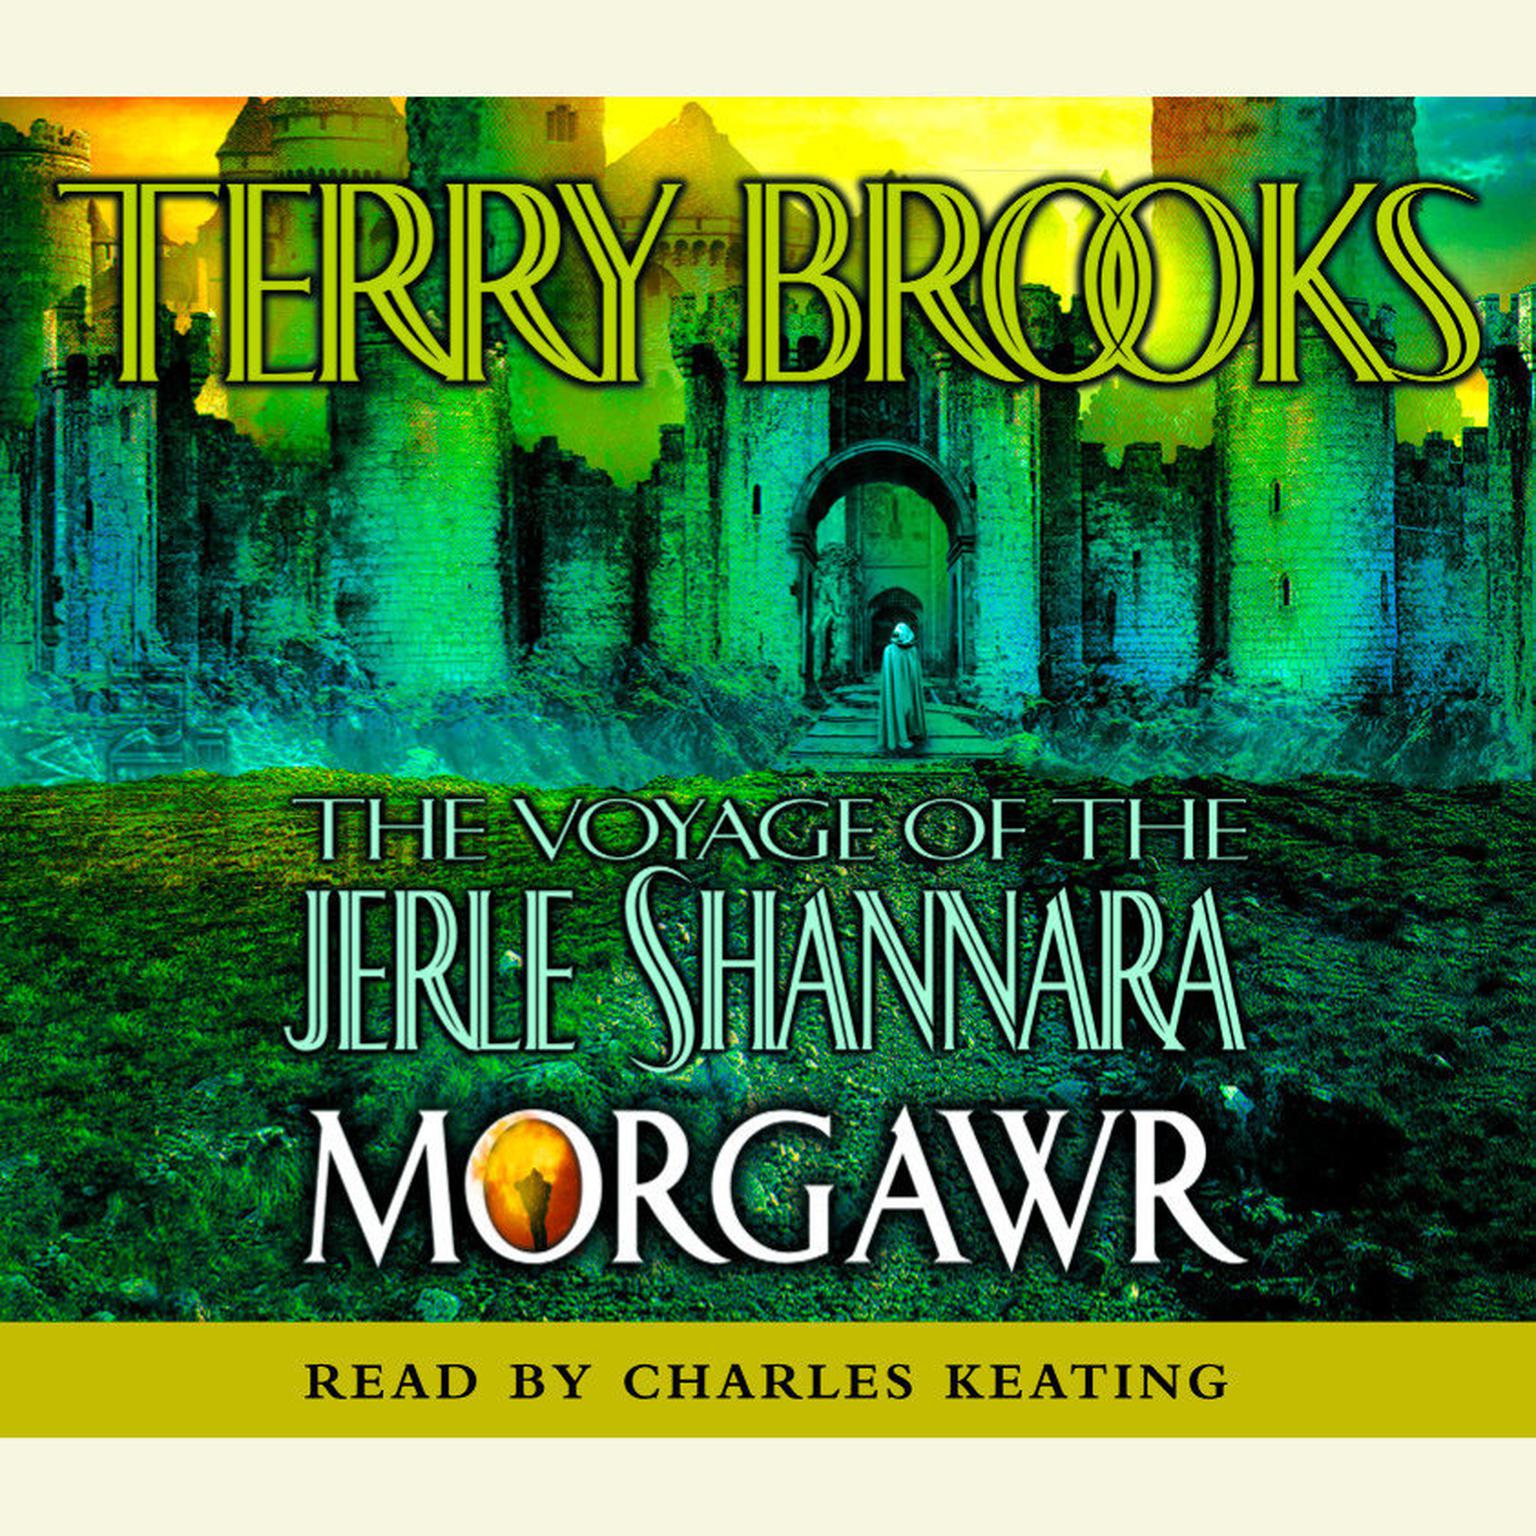 The Voyage of the Jerle Shannara: Morgawr (Abridged) Audiobook, by Terry Brooks